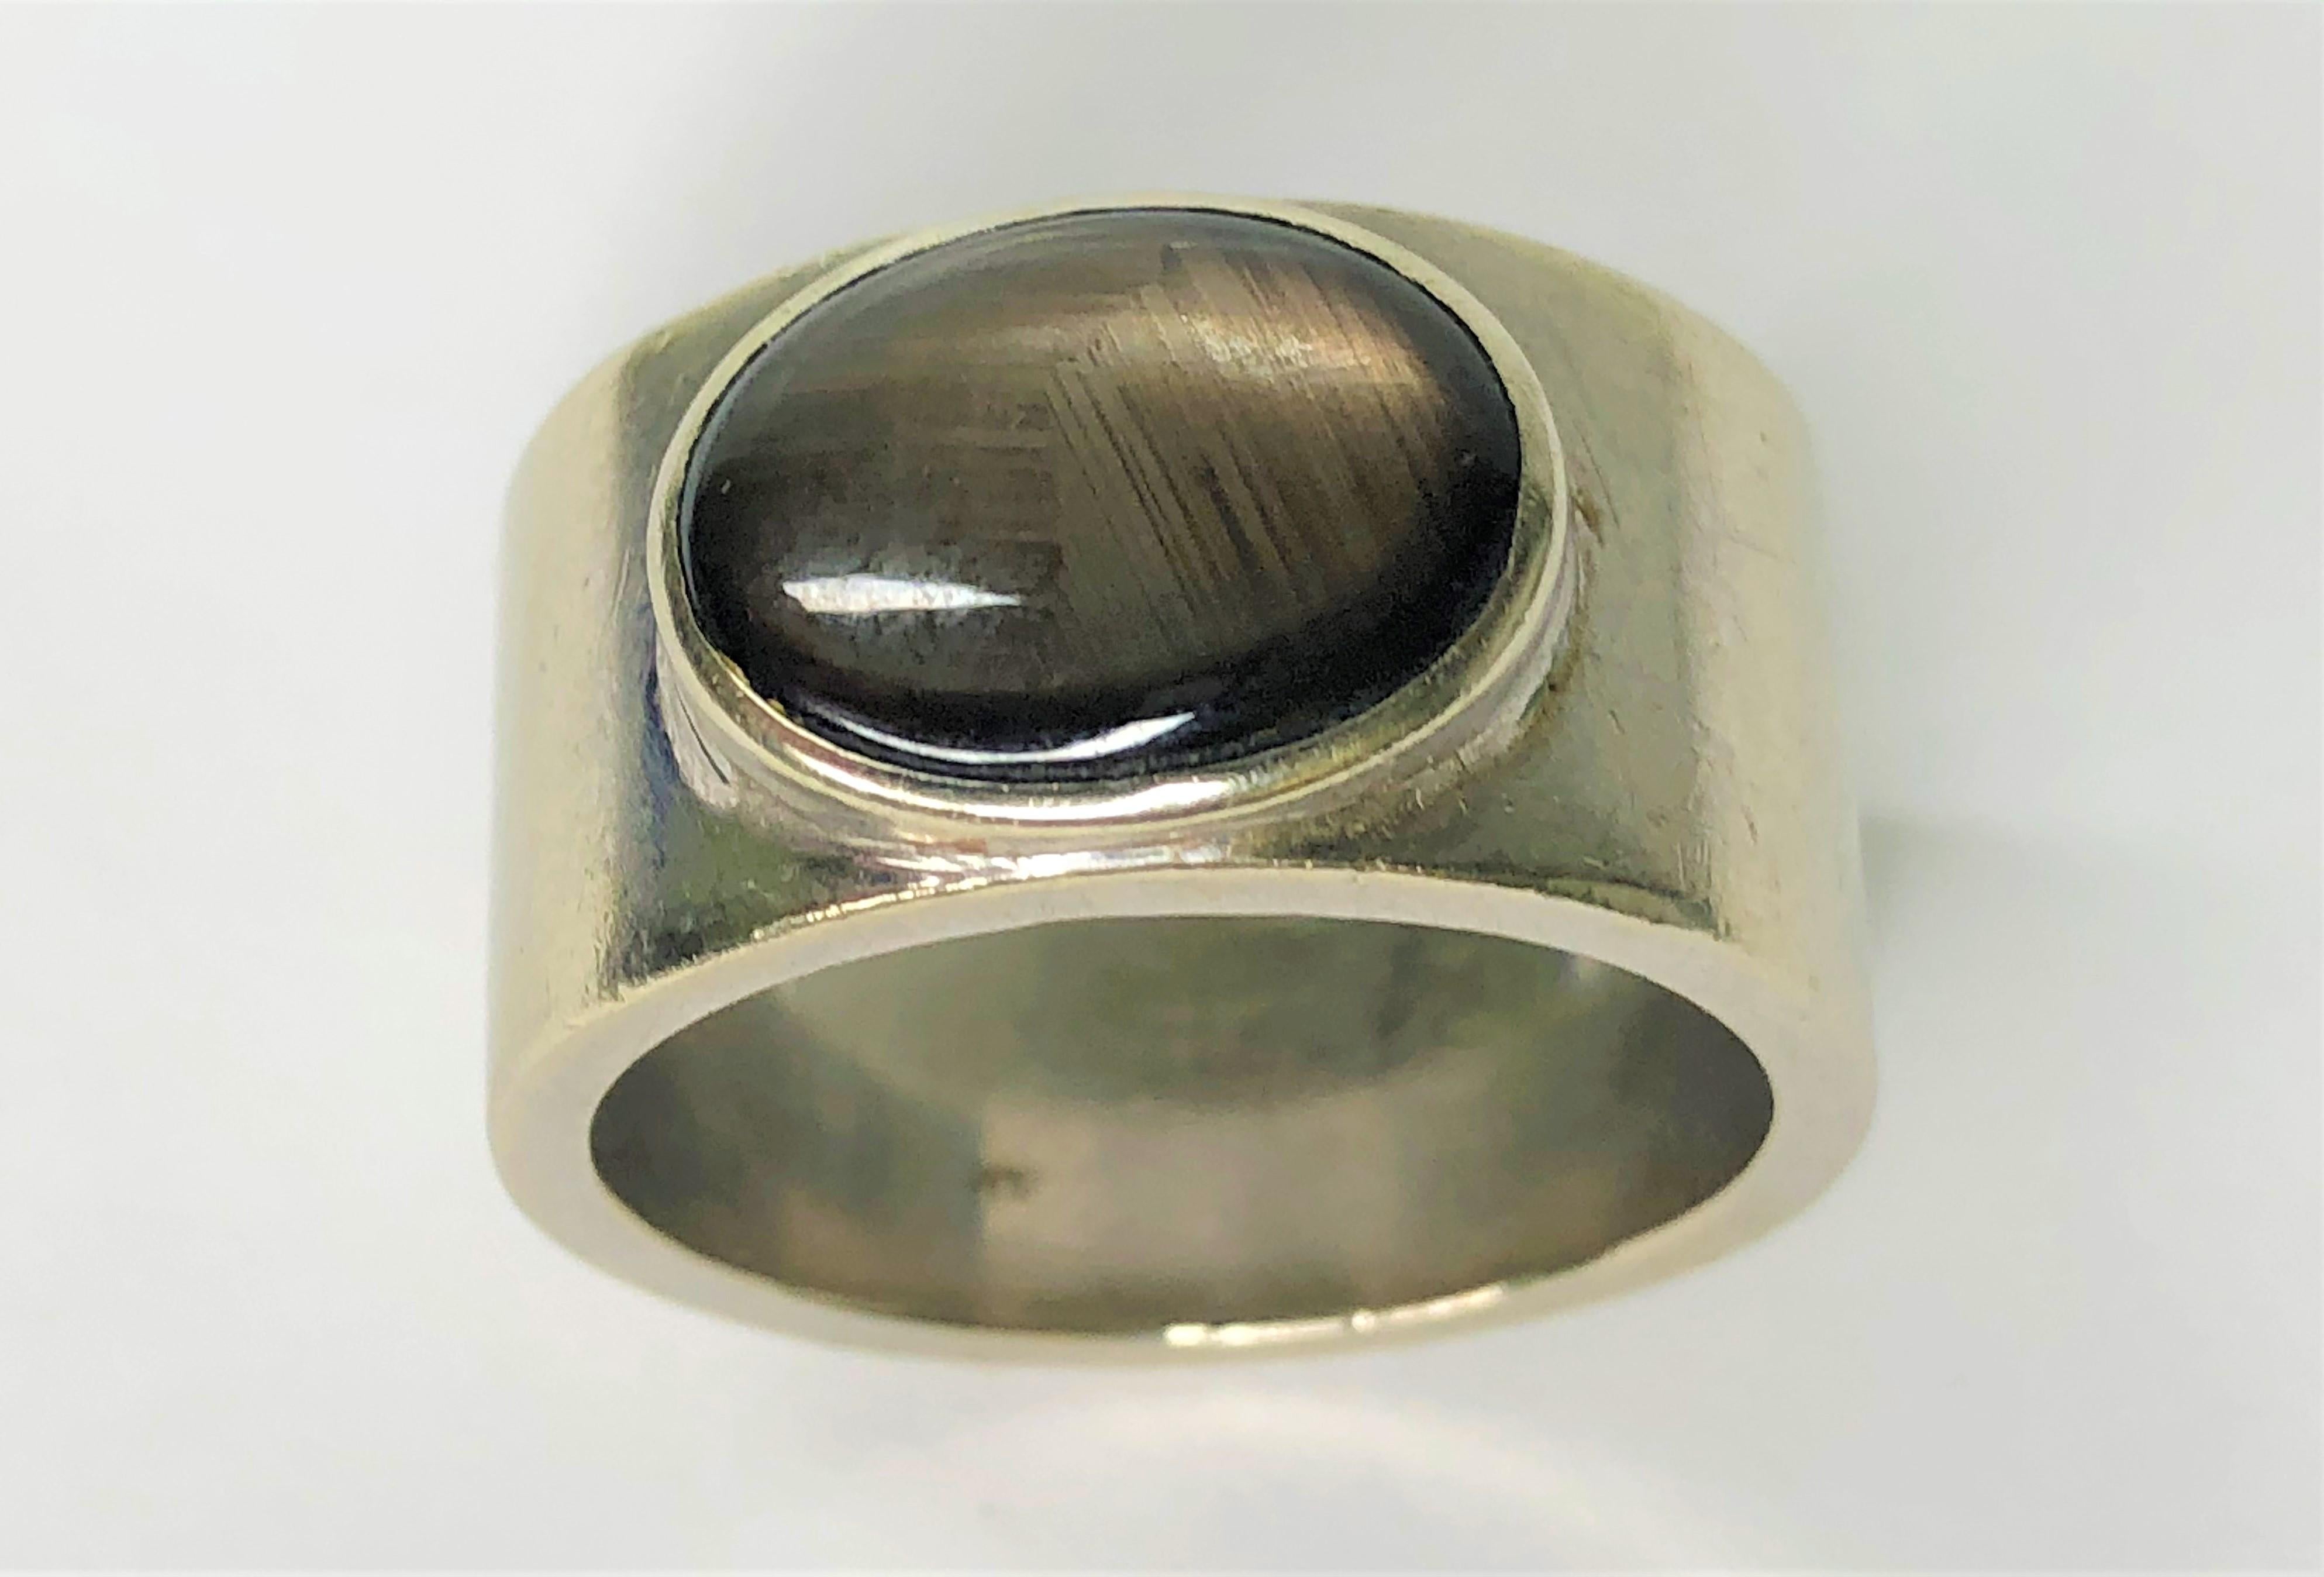 This will be a perfect everyday ring for anyone!
14K white gold.
12.2mm wide.
Oval star sapphire, approximately 13mm x 9mm.
There is patina on the band, please see pictures.  This can be polished out, if desired.
Approximate size 10.5
15dwt